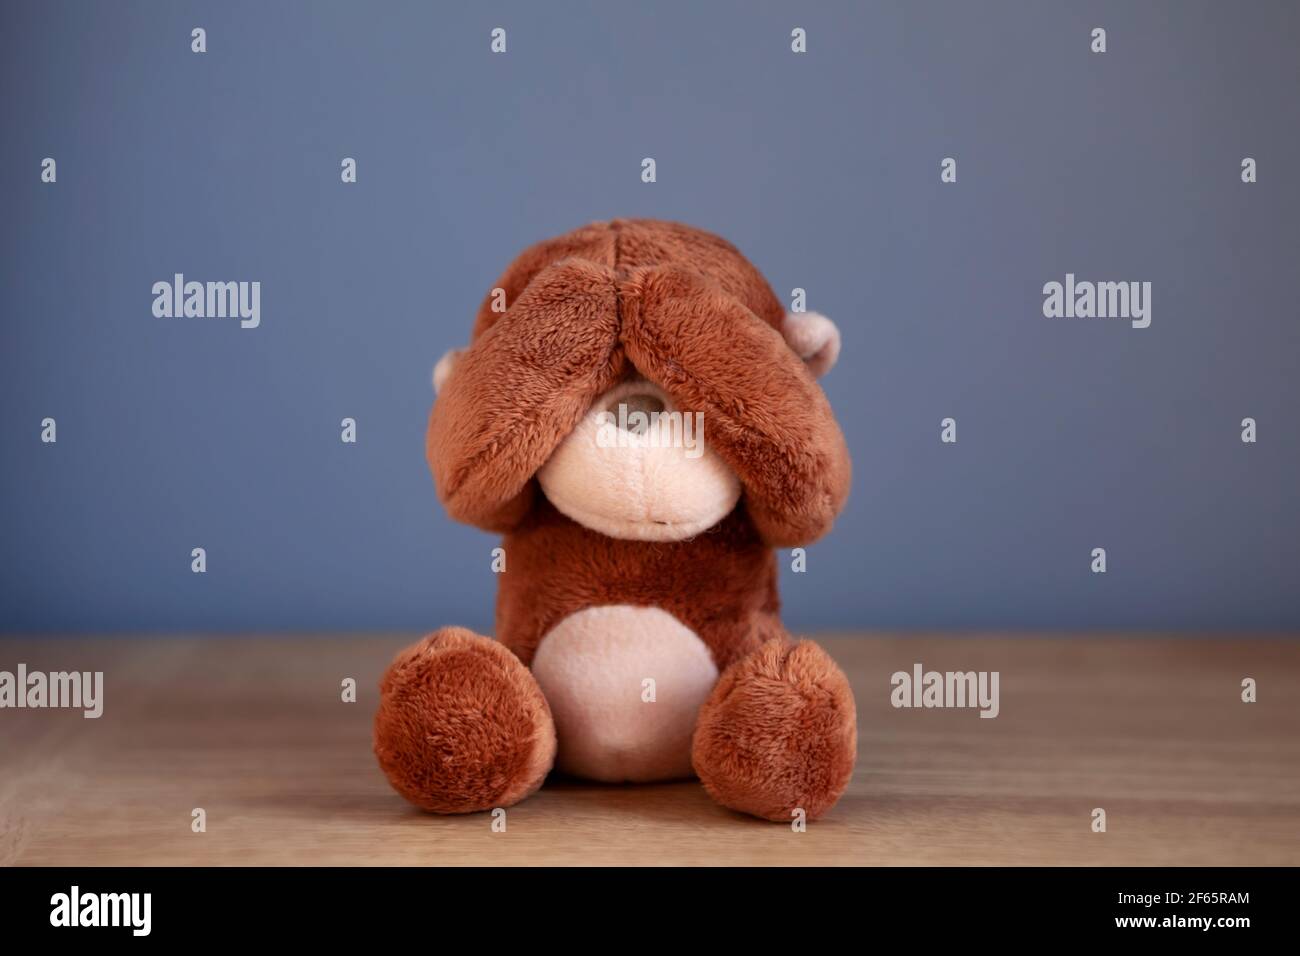 'See no evil' proverb with monkey teddy bear covering his eyes. Stock Photo